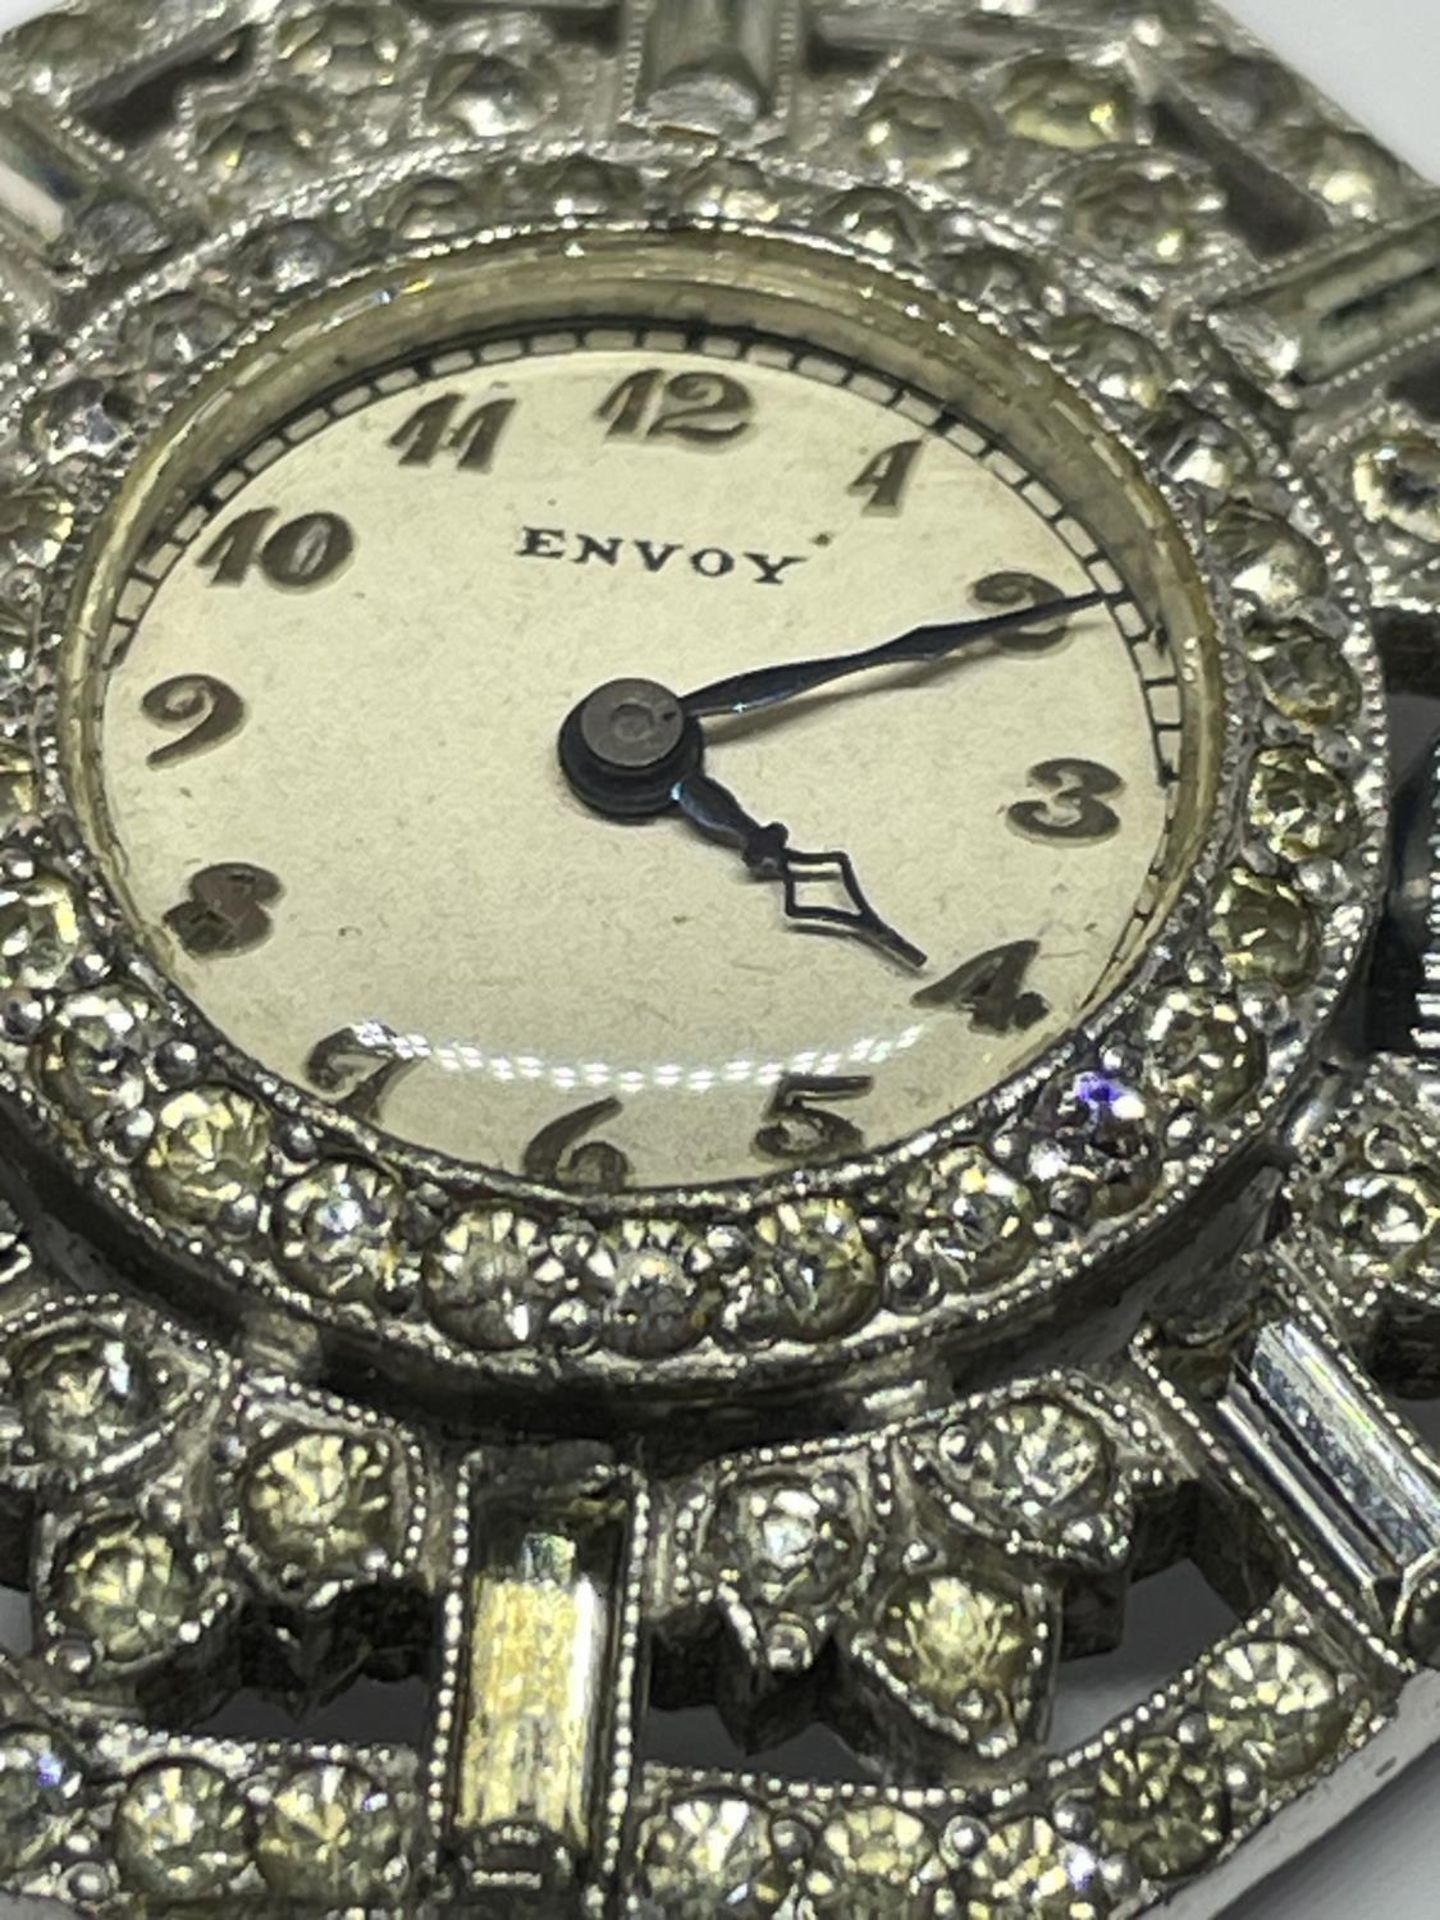 AN AMERICAN 1930'S ENVOY BROOCH WATCH WITH CLEAR STONE DECORATION SEEN WORKING BUT NO WARRANTY - Bild 3 aus 5